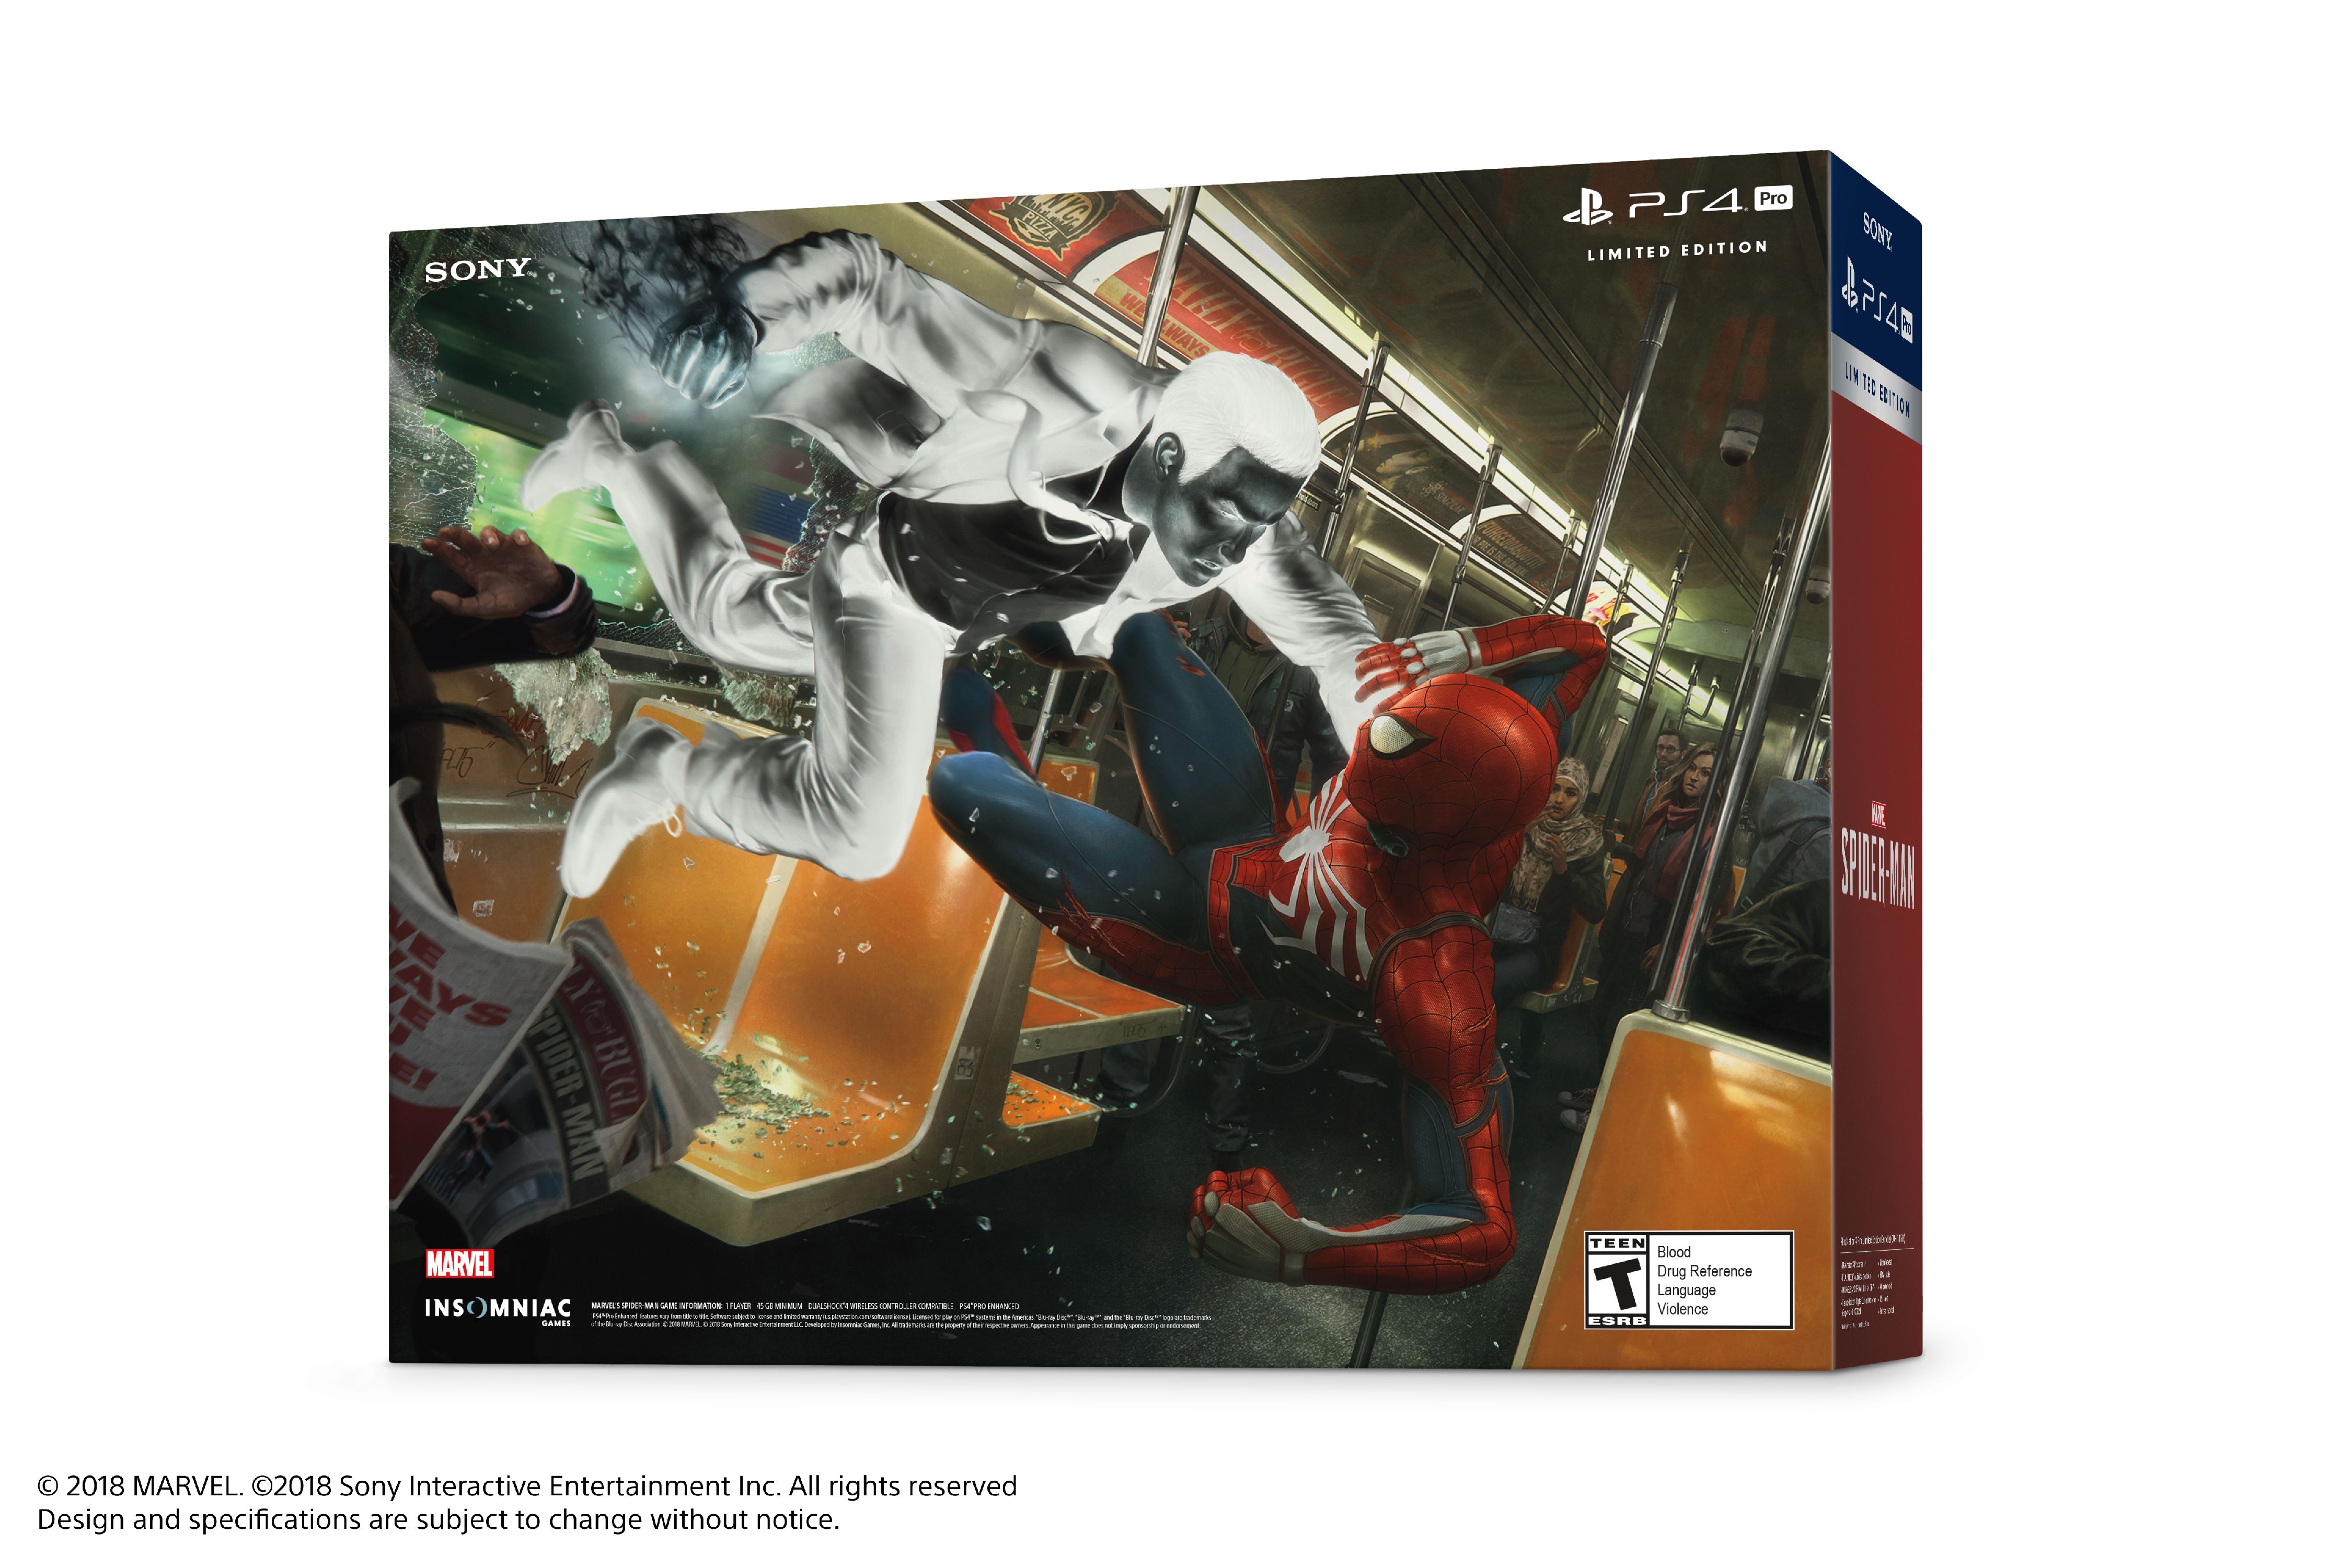 Sony Limited Edition Marvels Spider-Man PS4 Pro 1TB Bundle, Red - image 5 of 8